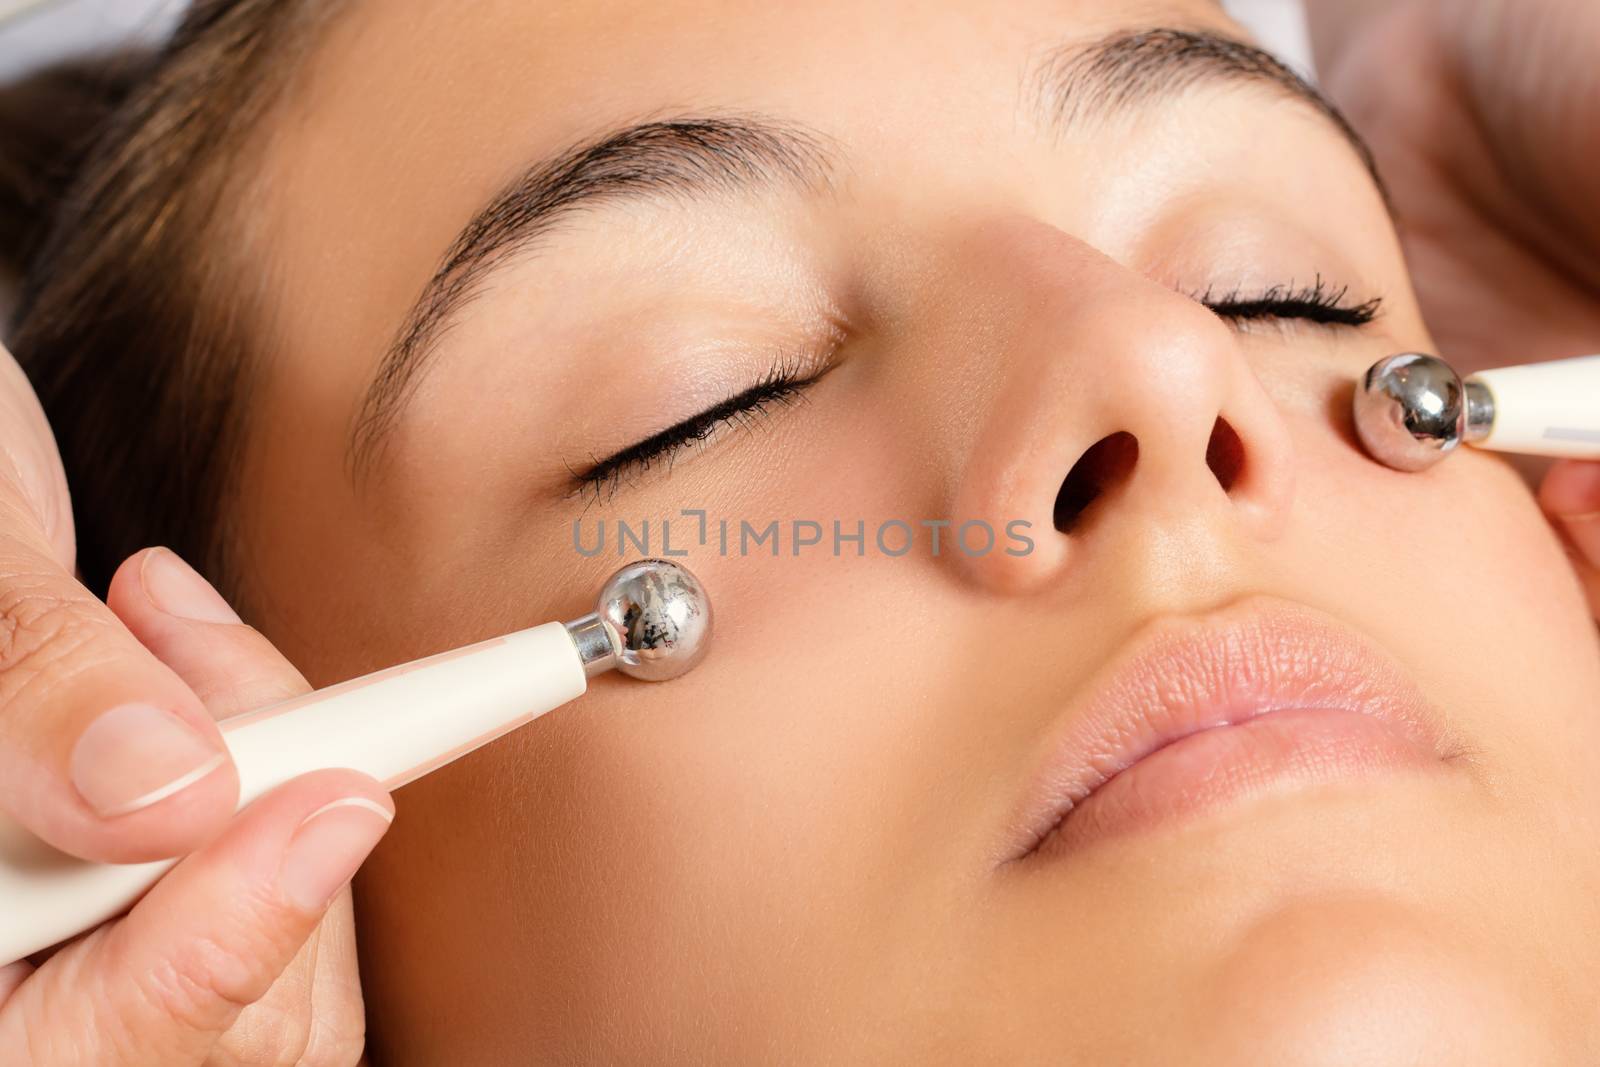 Galvanic facial treatment with low level current electrodes. by karelnoppe